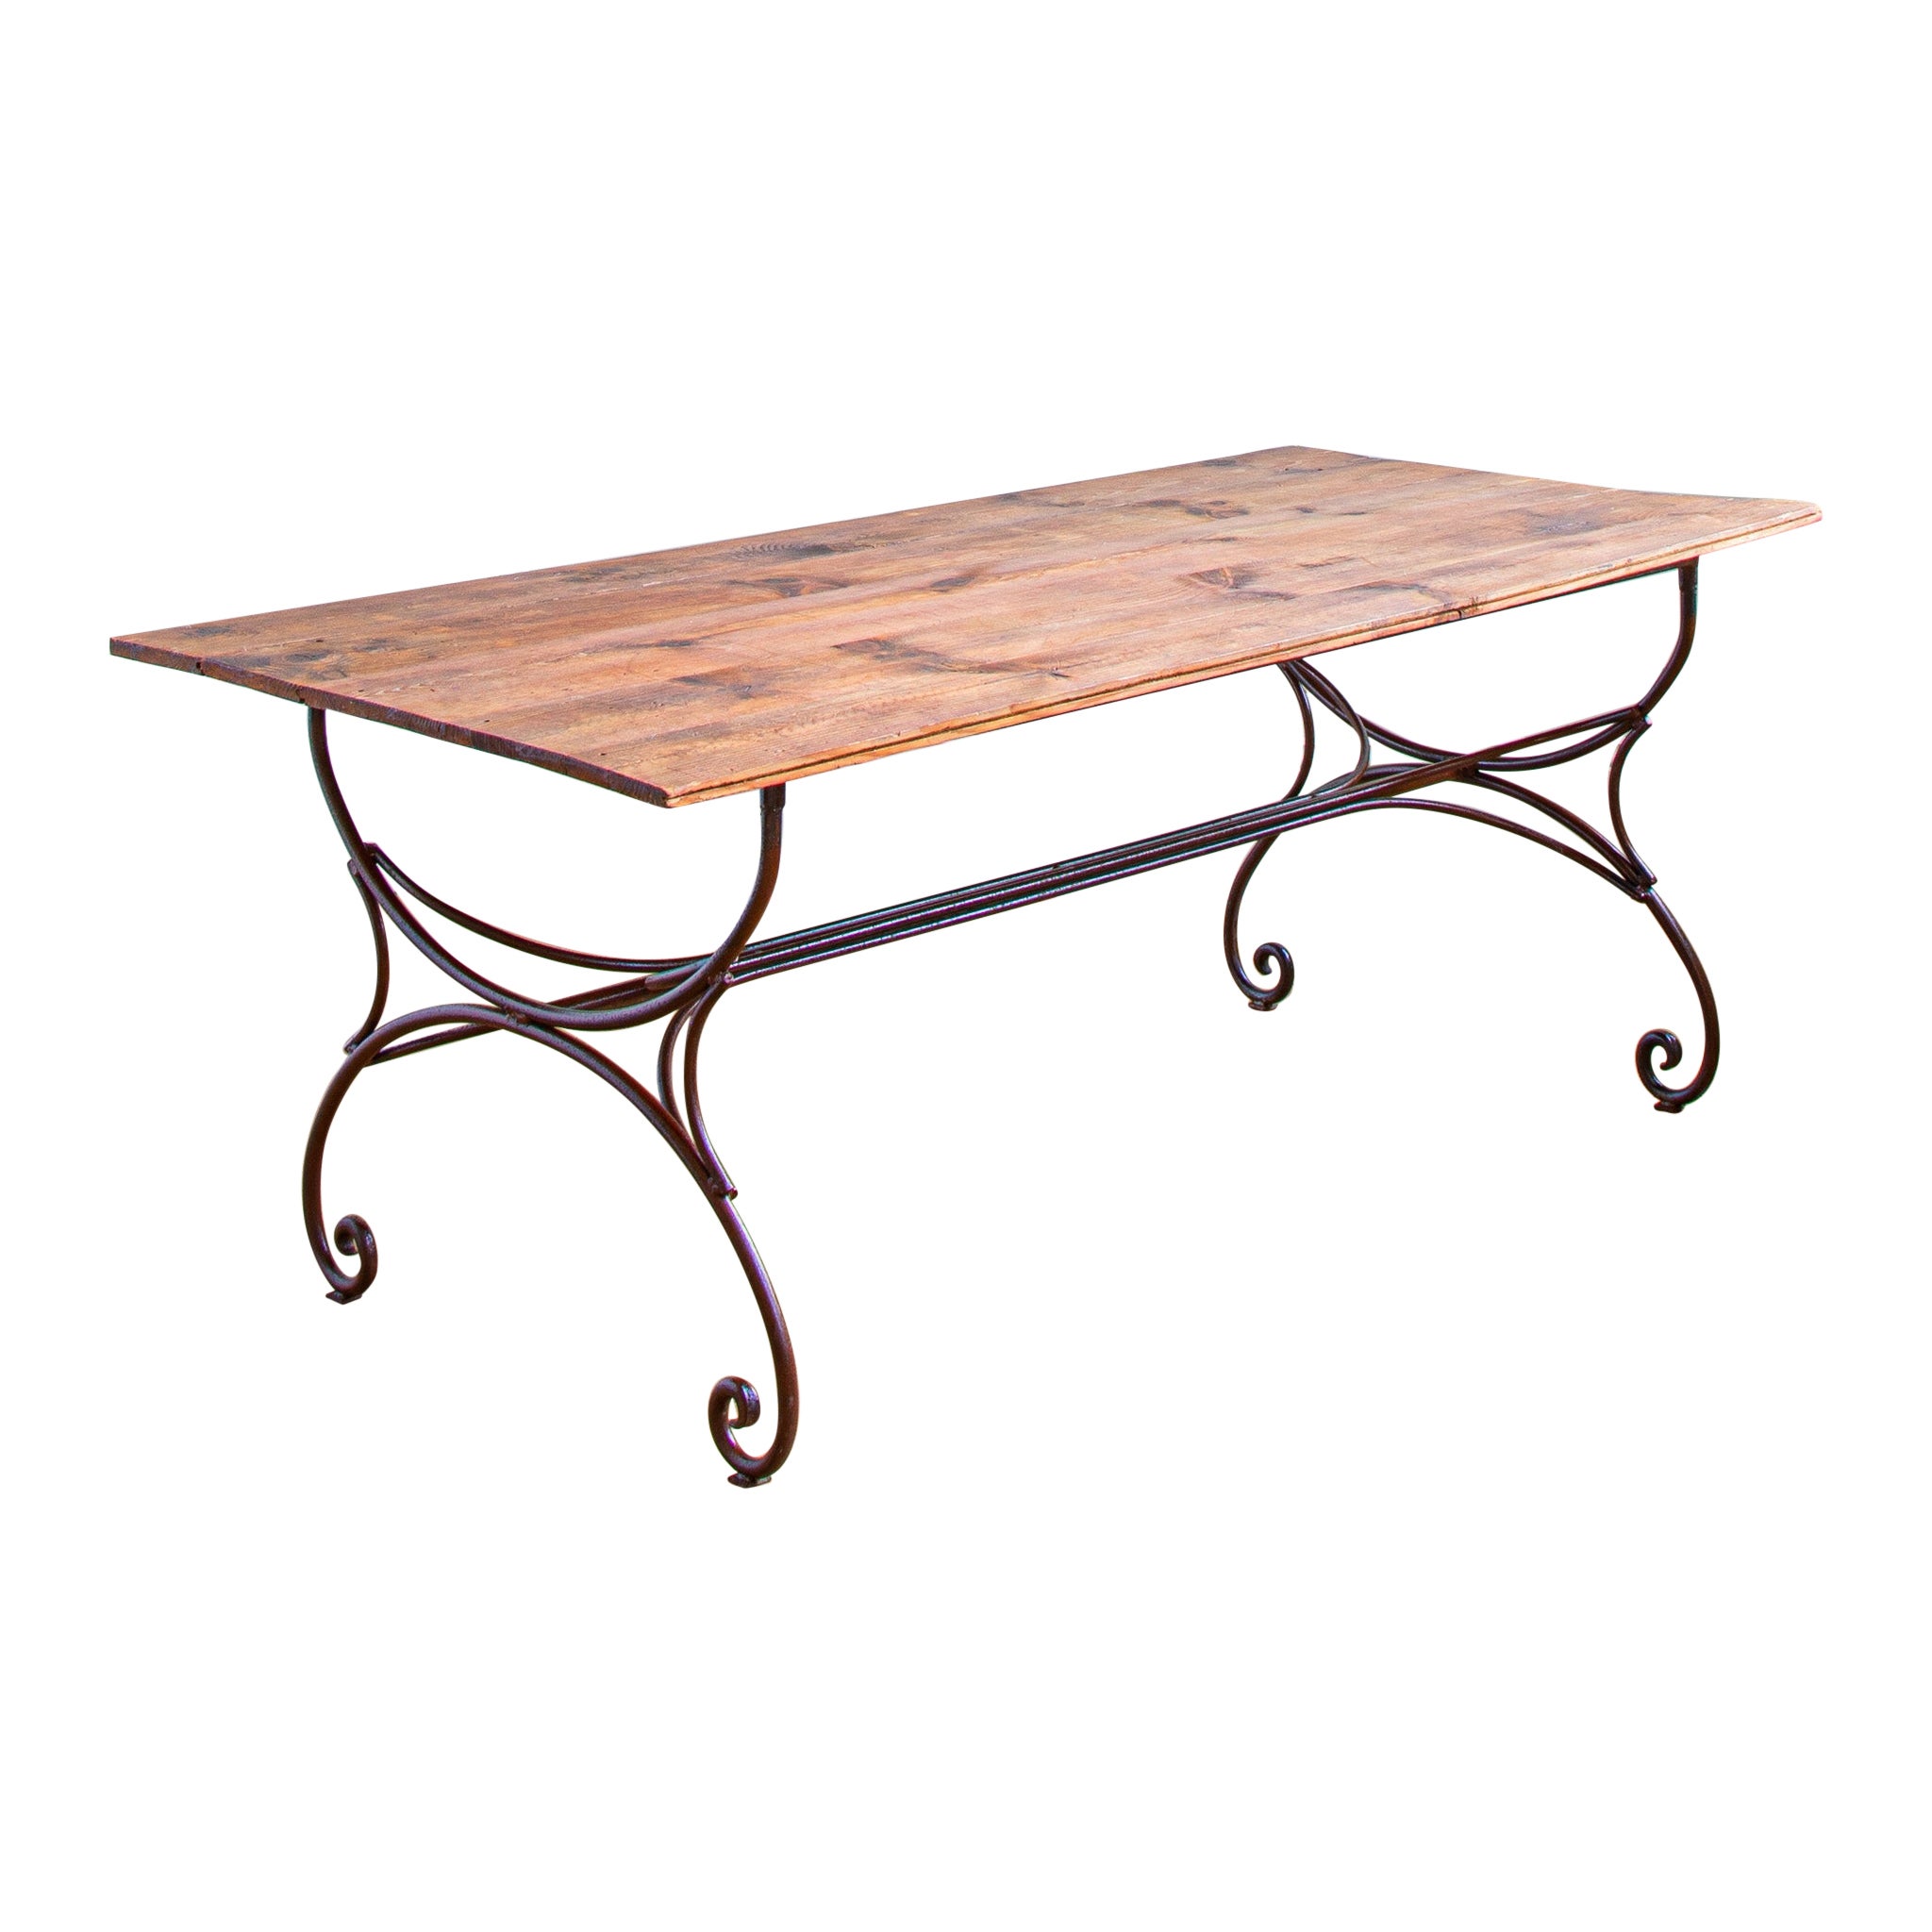 Large French Rustic Wrought Iron Dining Or Garden Table